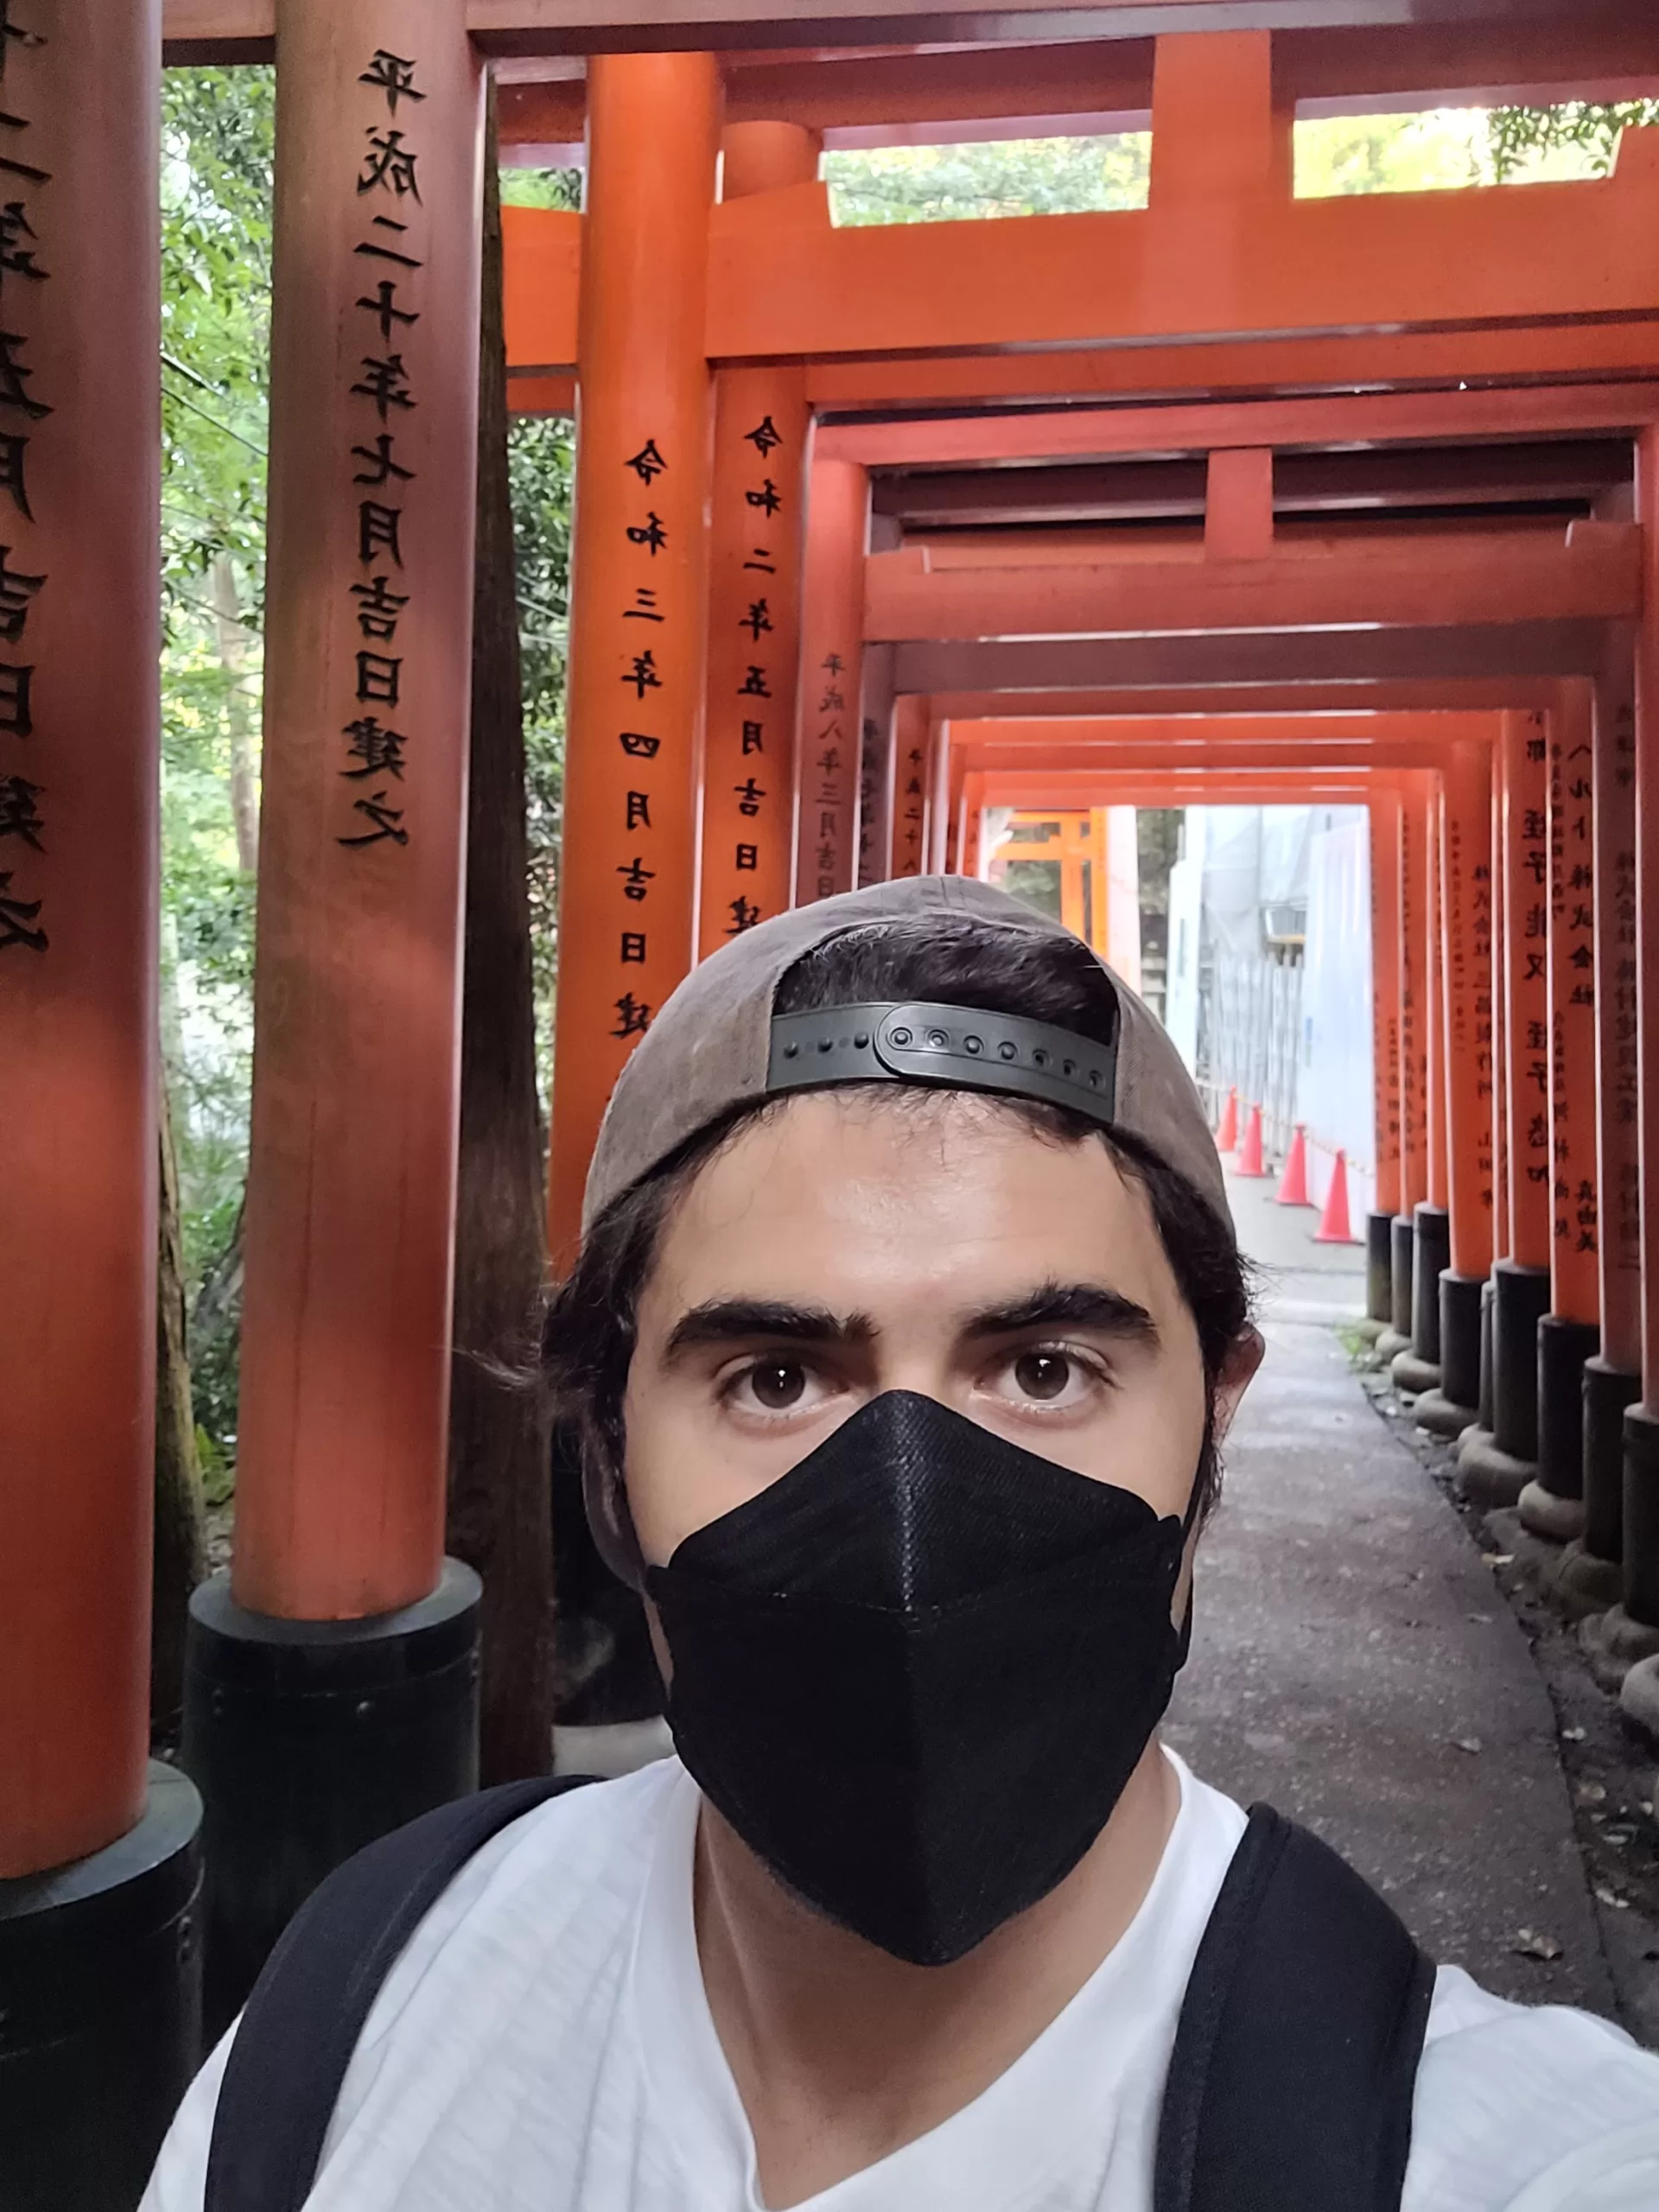 Masks in Japan: Where and when to wear them